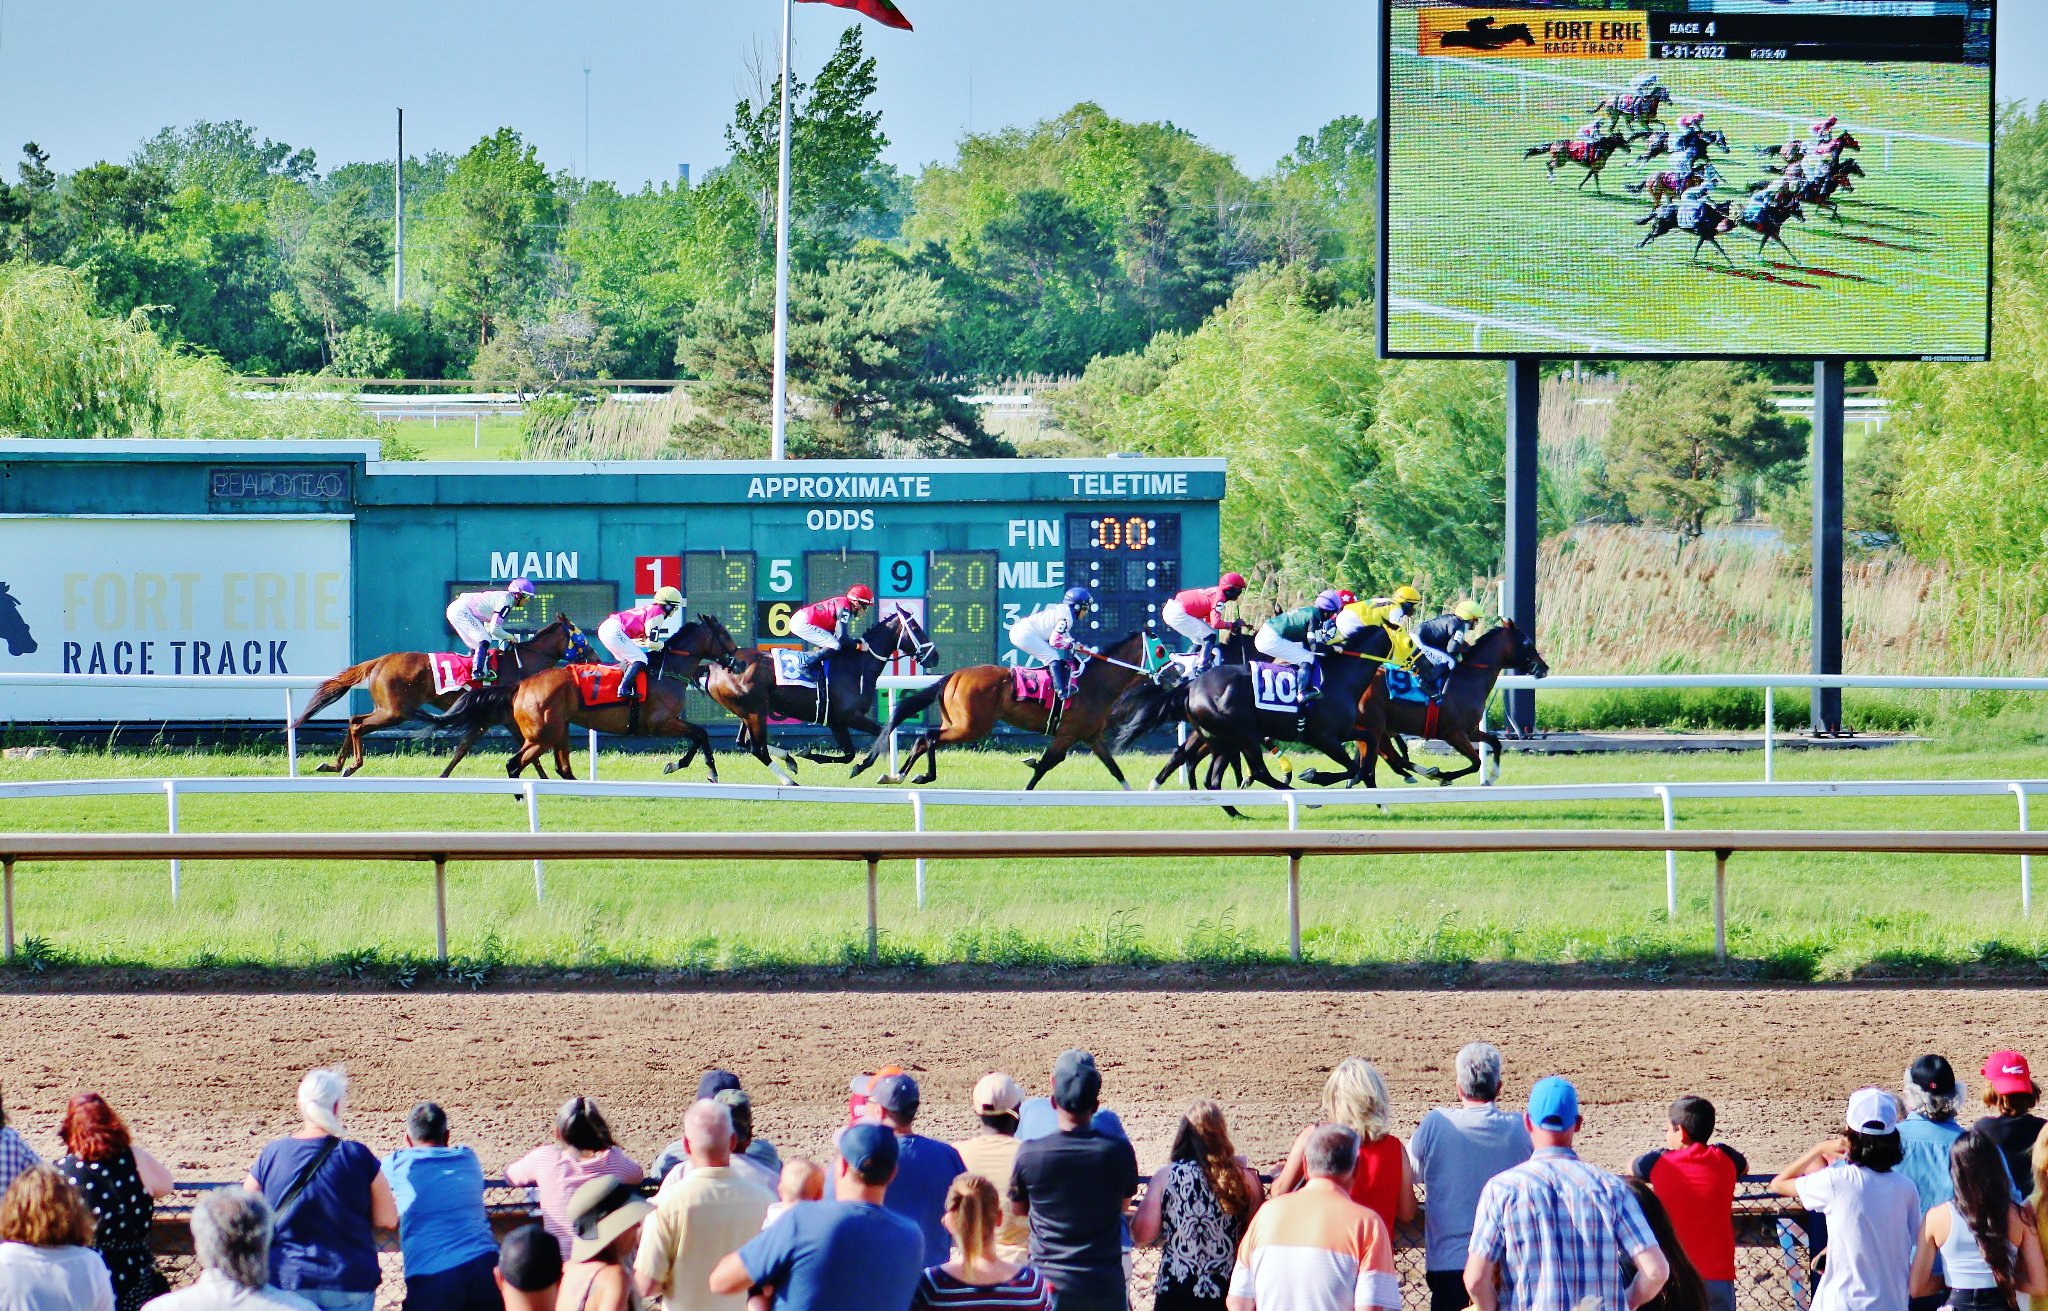 Racing on the turf at Fort Erie Racetrack